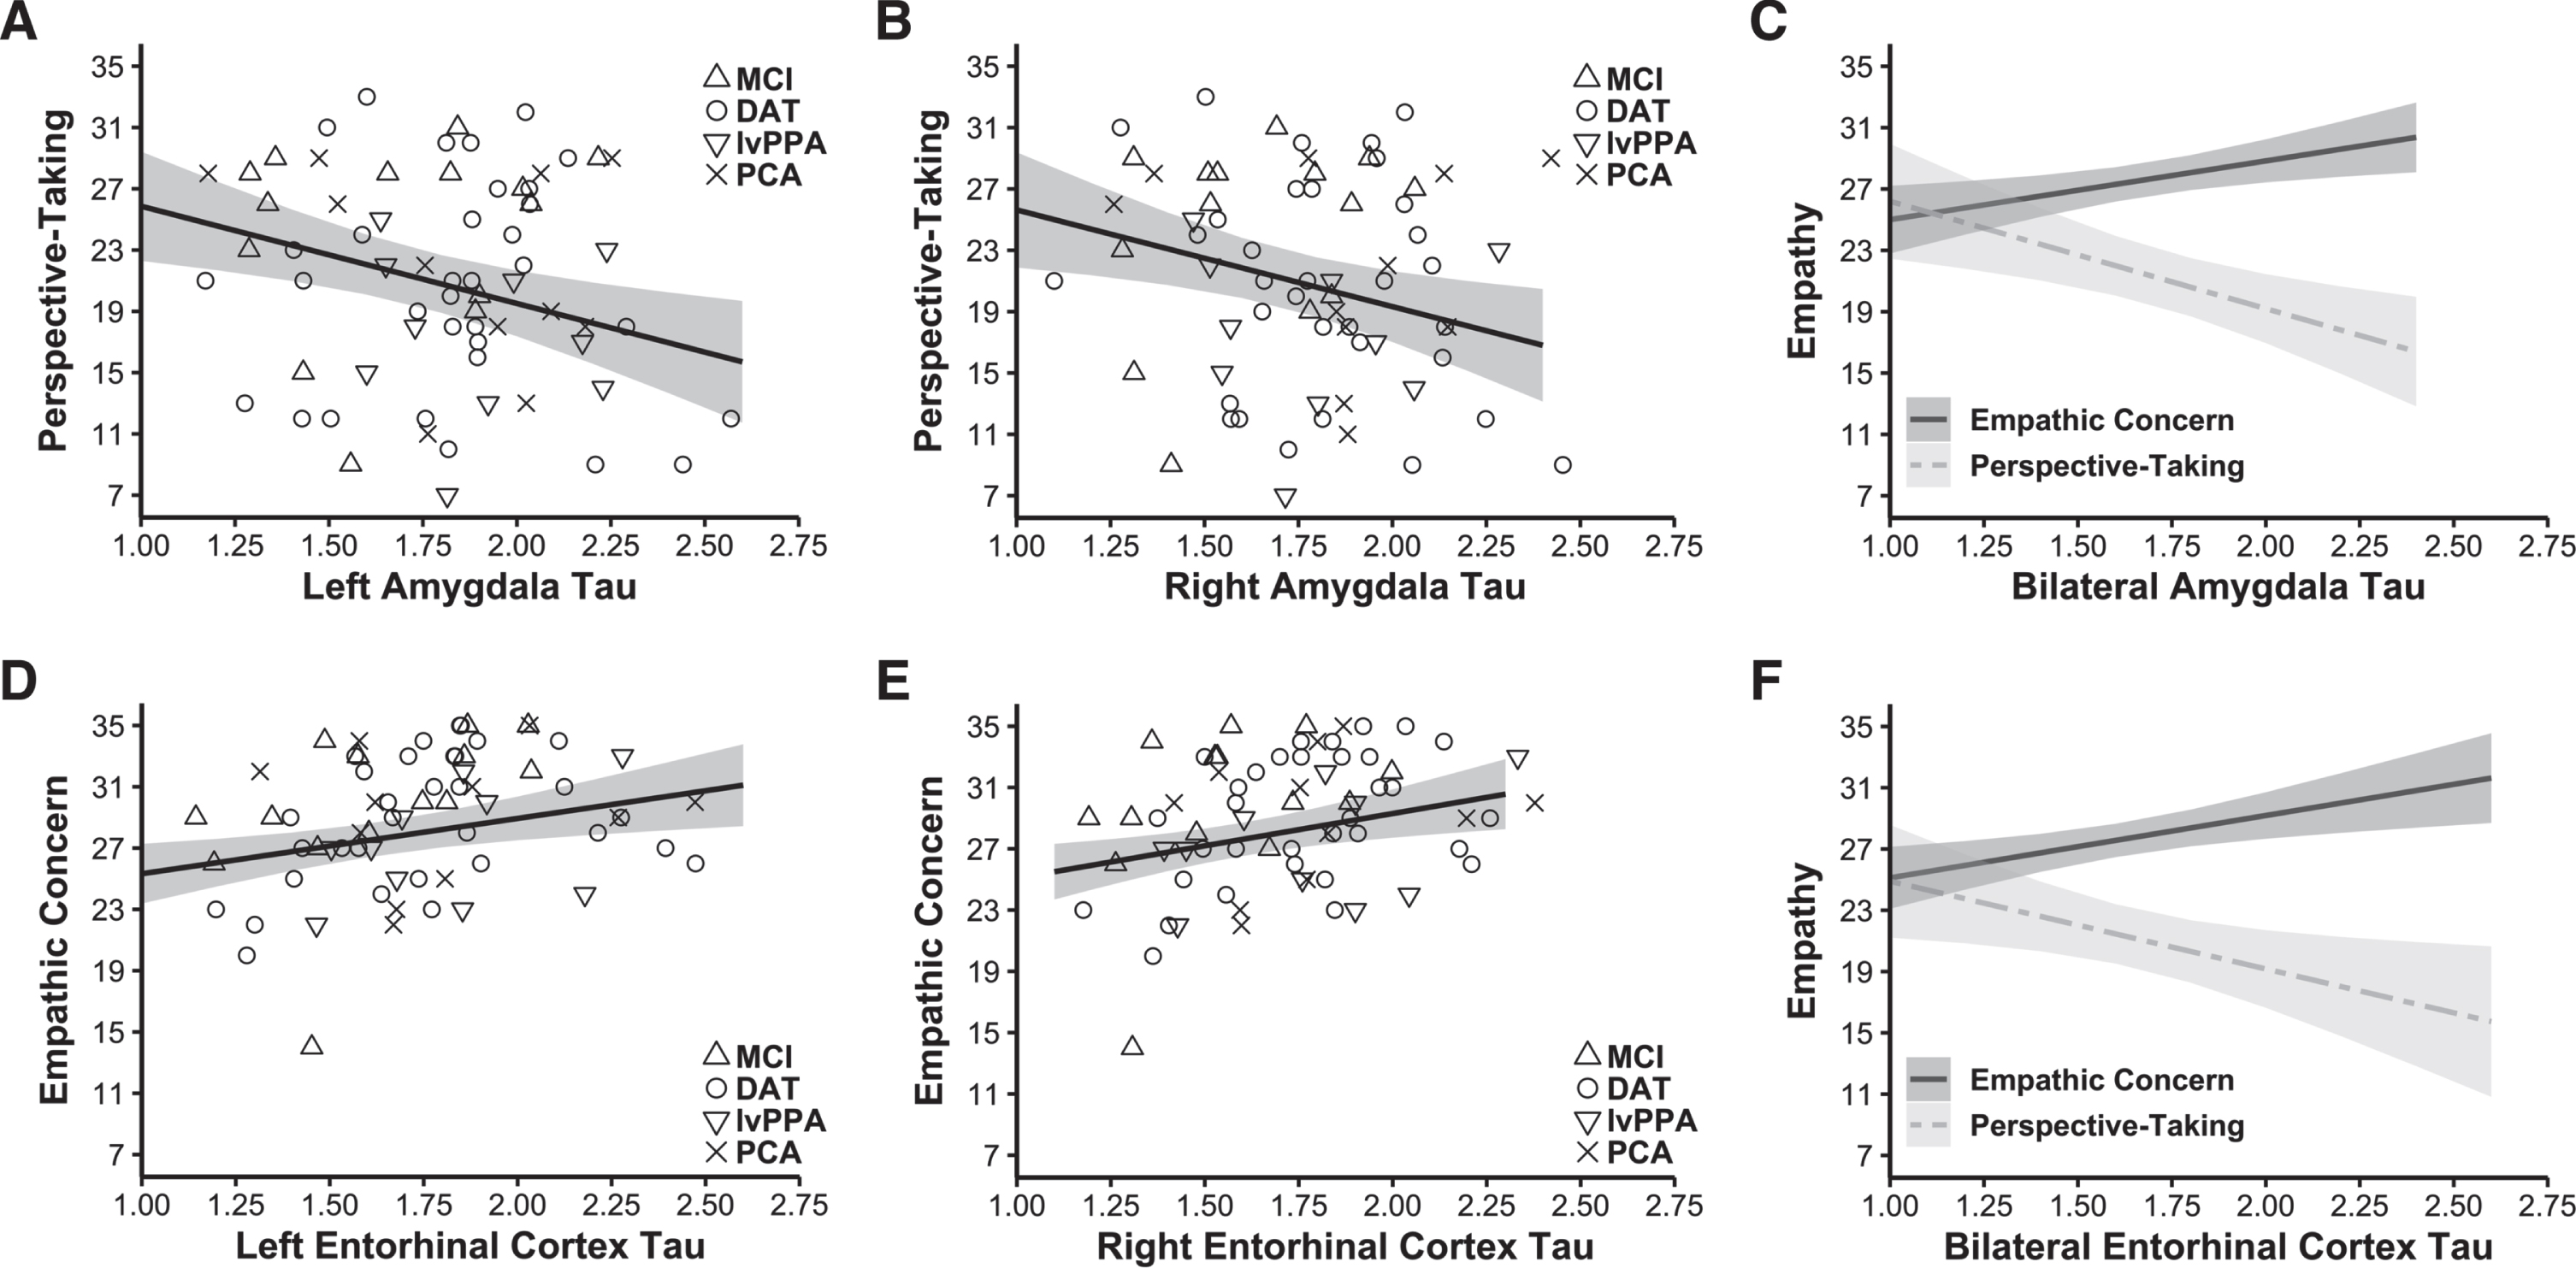 Tau burden in the amygdala had a negative association with perspective-taking, but tau burden in the entorhinal cortex had a positive association with empathic concern. Forward-selection hierarchical regression models conducted in the Aβ+ group found tau burden in the MTL was differentially related to empathy. Greater tau burden in the A) left (final model b = –6.349, final model coefficient p = 0.003, final model adjusted R2 = 0.466, n = 68) and B) right amygdala (final model b = –6.305, final model coefficient p = 0.009, final model adjusted R2 = 0.451, n = 68) related to lower perspective-taking. In contrast, greater tau burden in the D) left (final model b = 3.610, final model coefficient p = 0.007, final model adjusted R2 = 0.518, n = 68) and E) right entorhinal cortex (final model b = 4.217, final model coefficient p = 0.006, final model adjusted R2 = 0.520, n = 68) was associated with greater empathic concern. Panels C and F indicate perspective-taking and empathic concern as they relate to tau burden in the bilateral amygdala and entorhinal cortex (tau burden in these bilateral regions were calculated as weighted averages using the number of voxels present in each MTL region). Covariates of non-interest in these analyses included gender, age at IRI, time interval in days between the tau-PET scan and IRI, CDR total score, and the contrasting IRI subscale (i.e., empathic concern or perspective-taking). Plotted regressions reflect the predicted fits from the analysis models, while the scatterplots indicate raw data grouped by diagnosis. MCI, mild cognitive impairment; DAT, dementia of the Alzheimer’s type; lvPPA, logopenic variant primary progressive aphasia; PCA, posterior cortical atrophy.